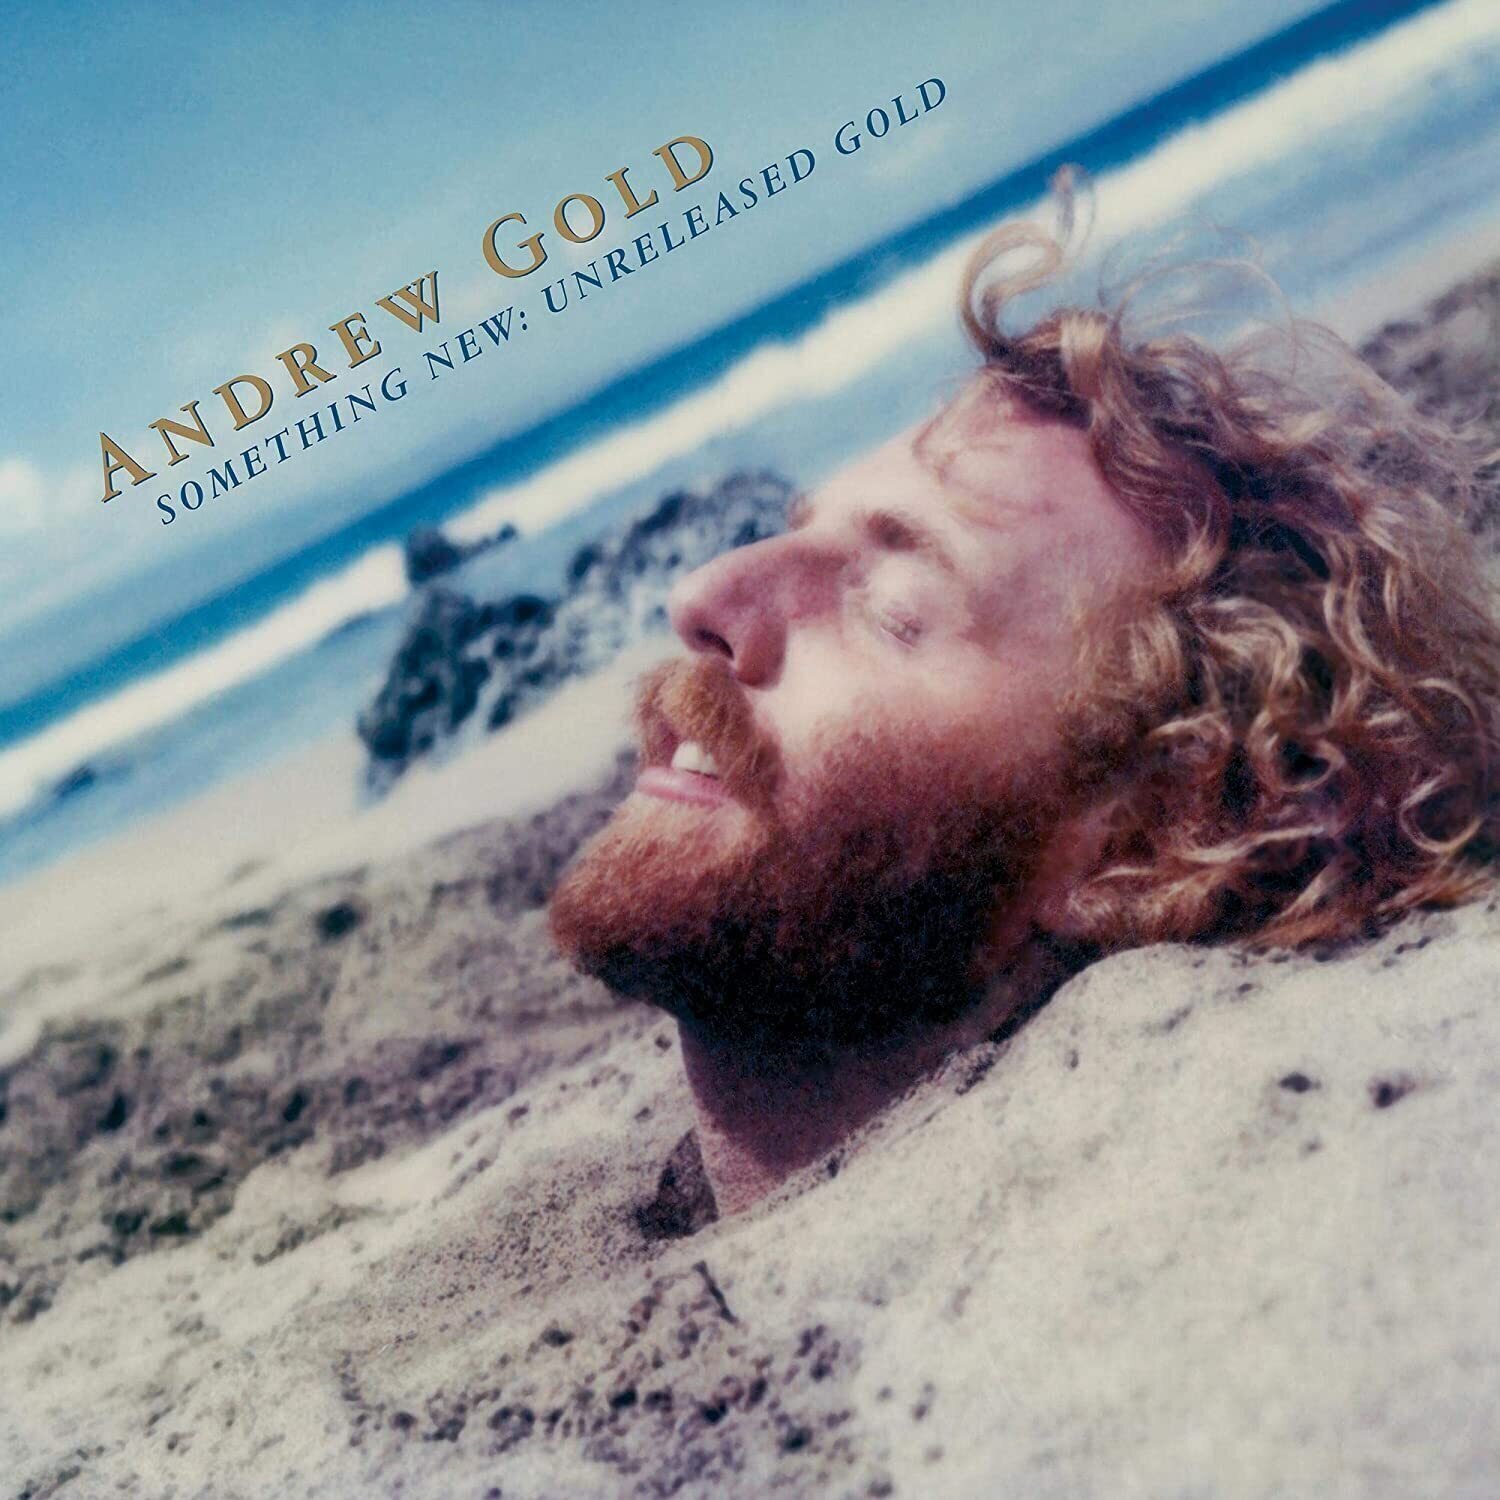 Vinyylilevy Andrew Gold - Something New: Unreleased Gold (RSD) (LP)